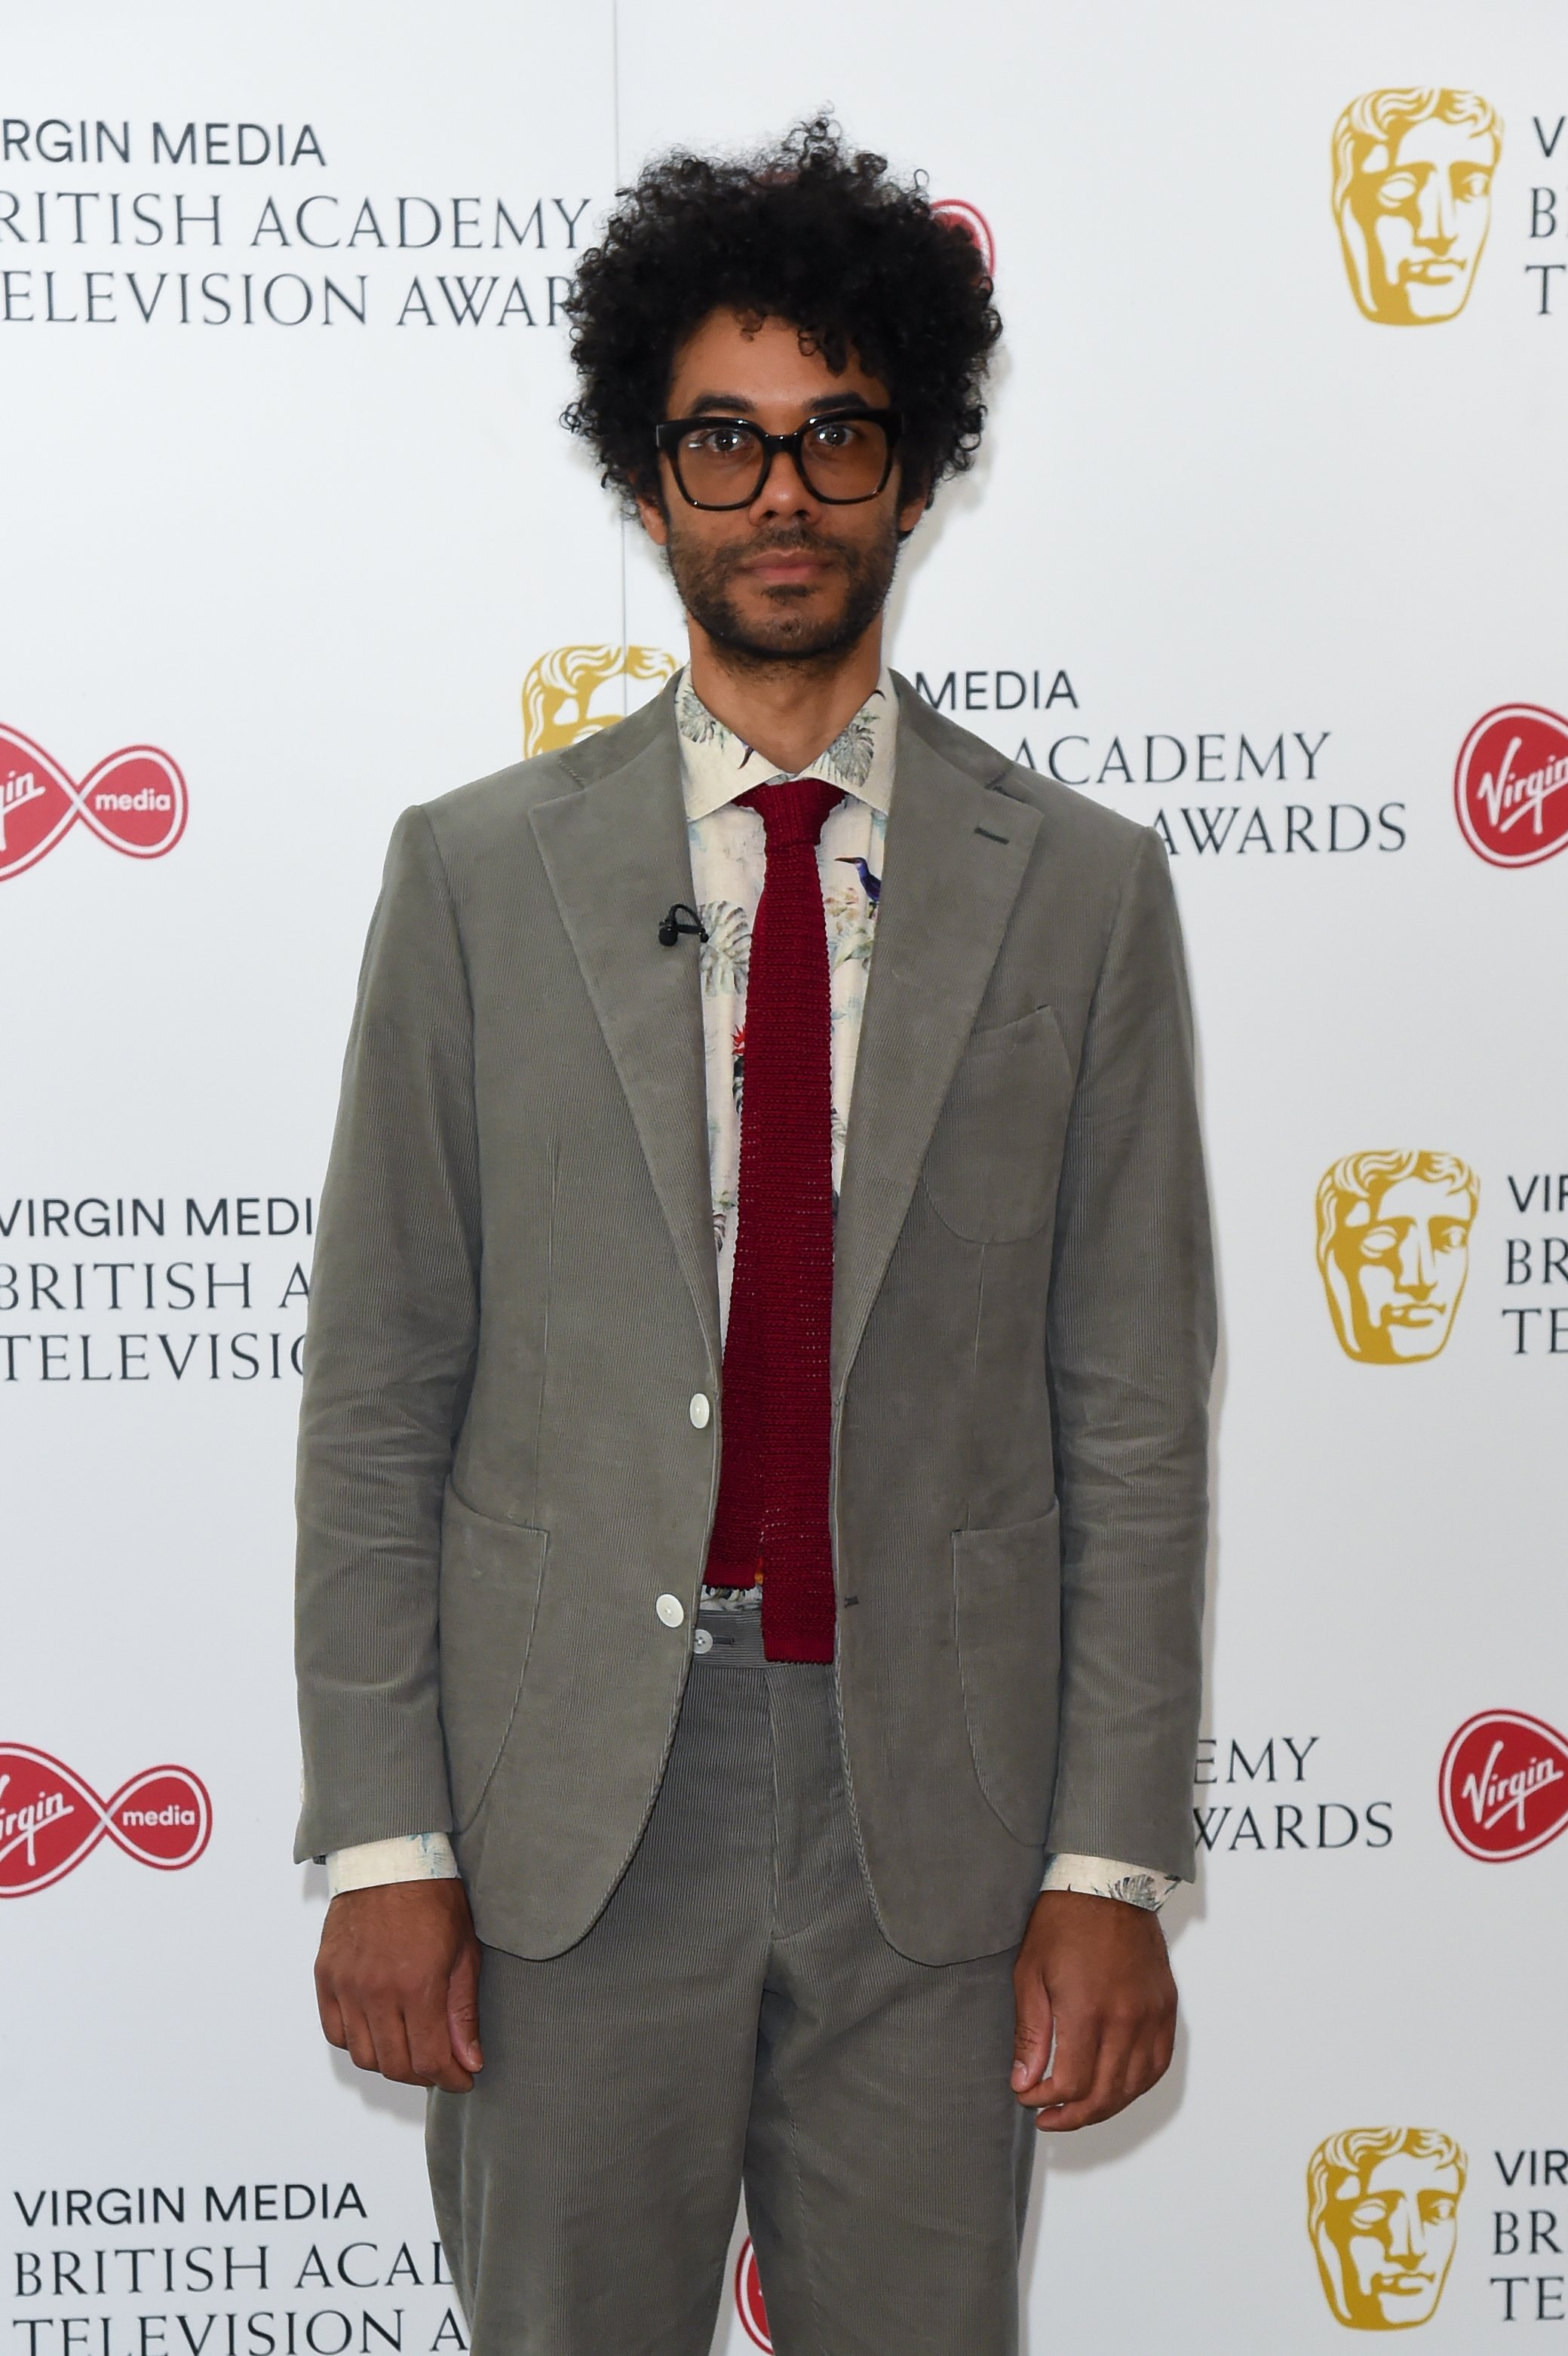 Richard Ayoade at the Virgin Media British Academy Television Awards on July 31, 2020, in London | Source: Getty Images